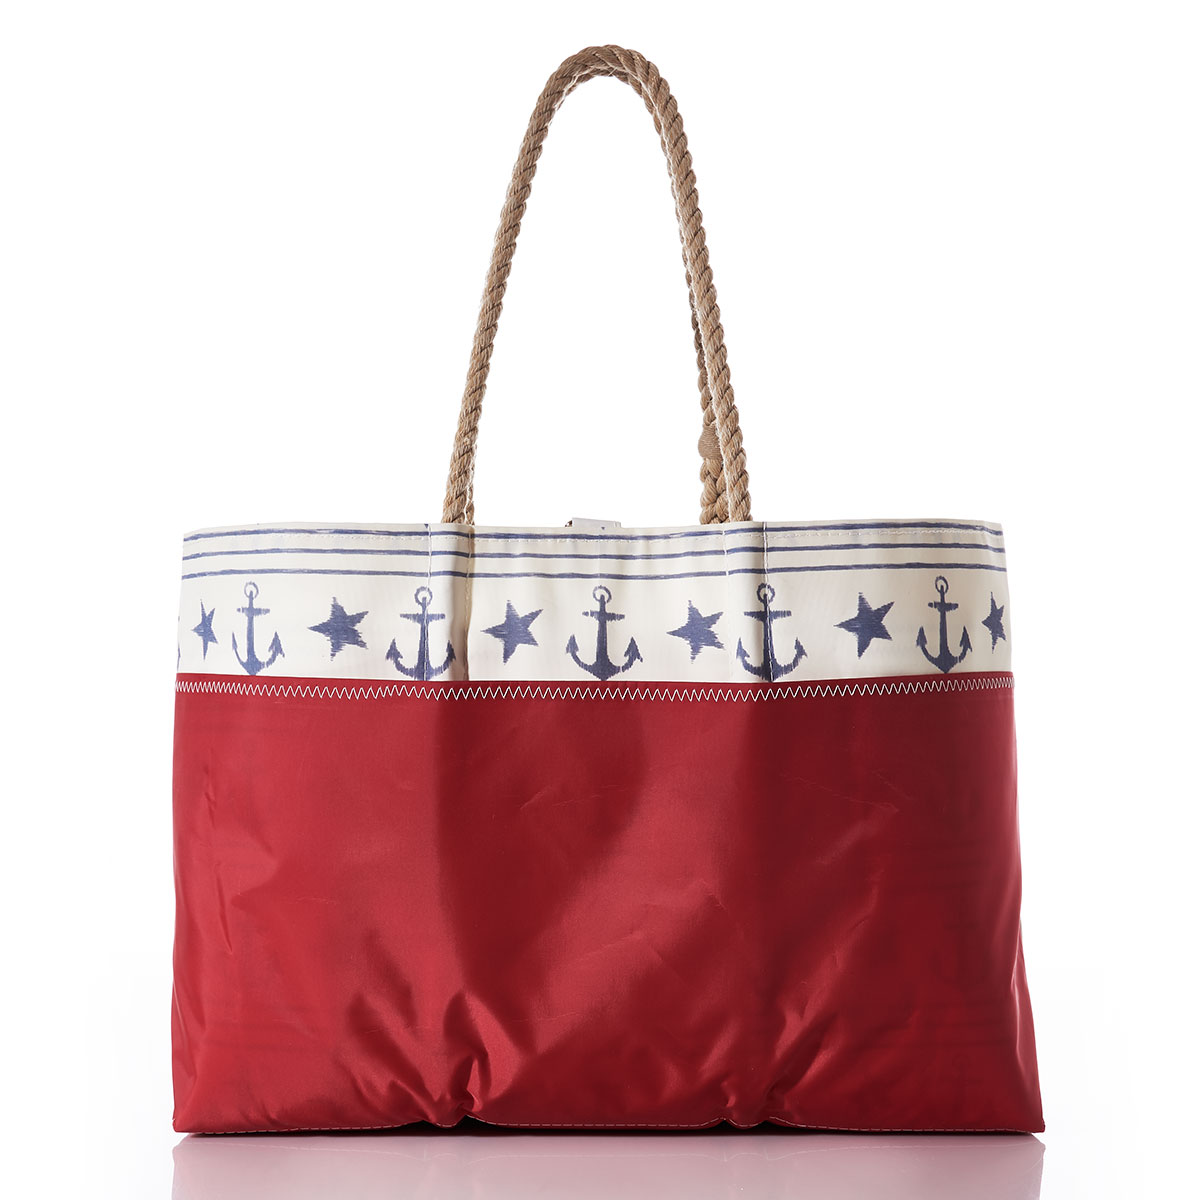 back view showing red outer pocket, blue anchors stars and stripes line this recycled sail cloth tote with a red bottom and hemp rope handles